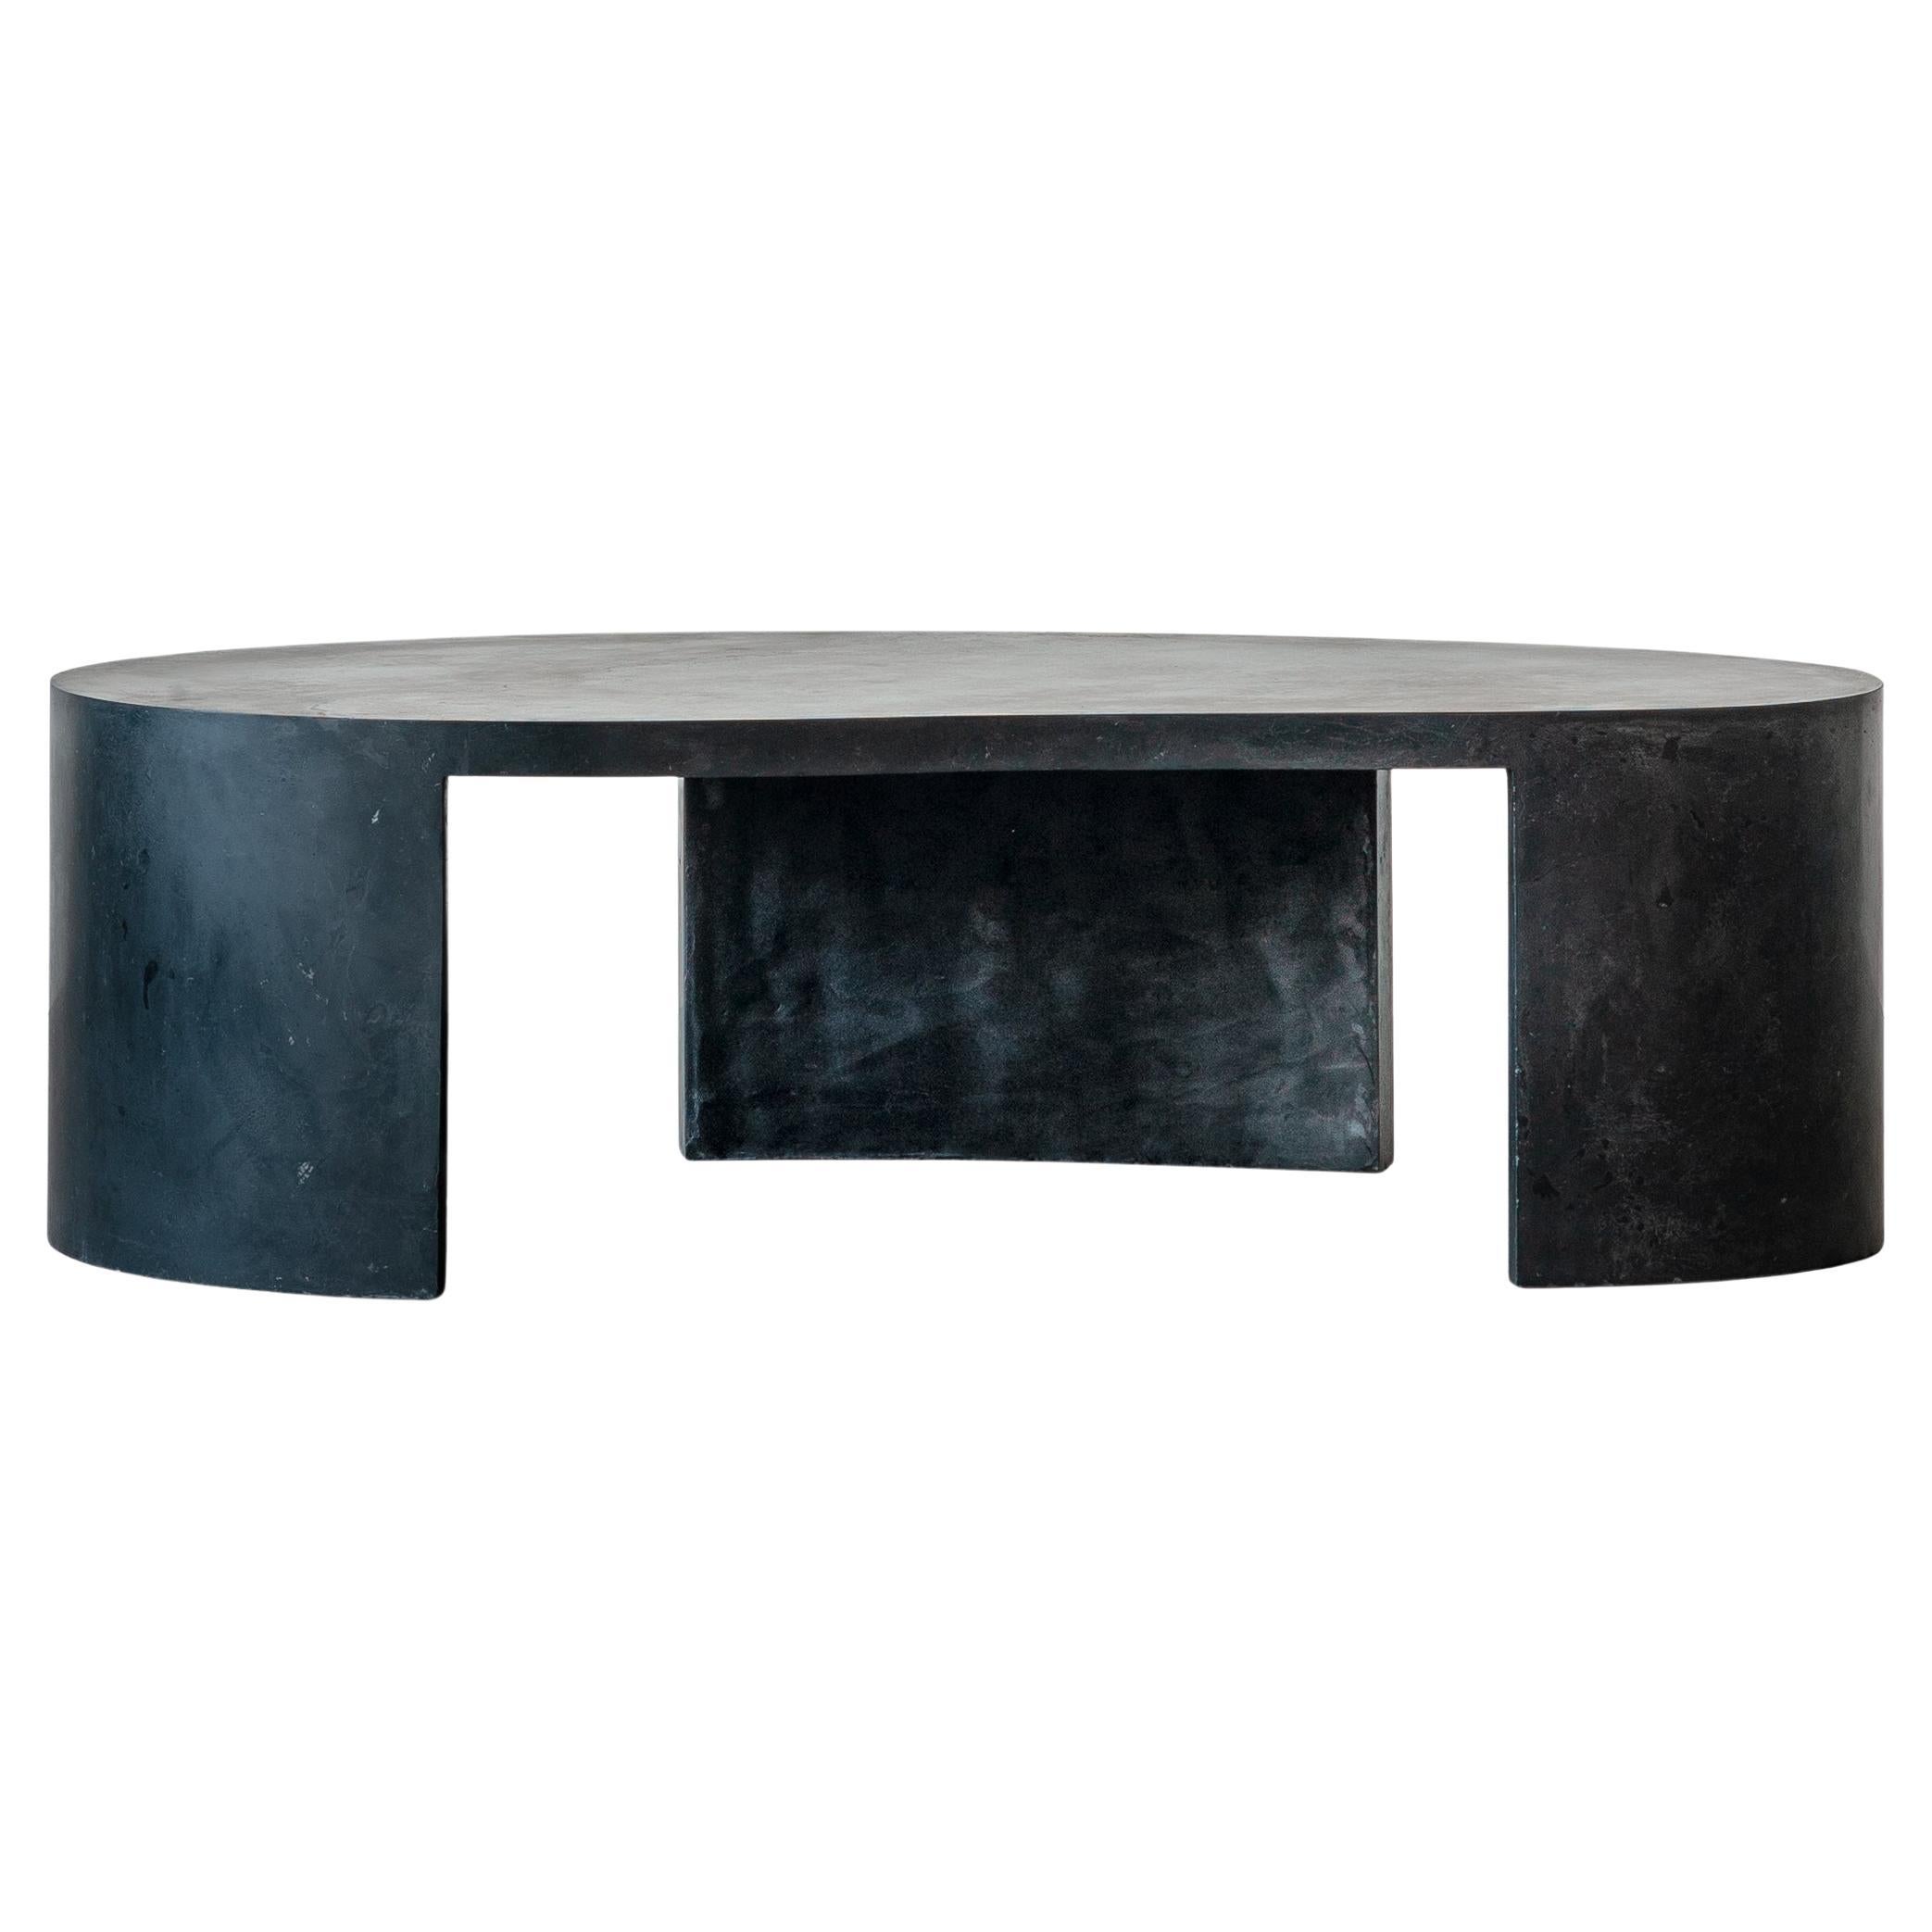 Stopgap, Black Stucco Coffee Table by Andréason & Leibel, Limited Edition For Sale